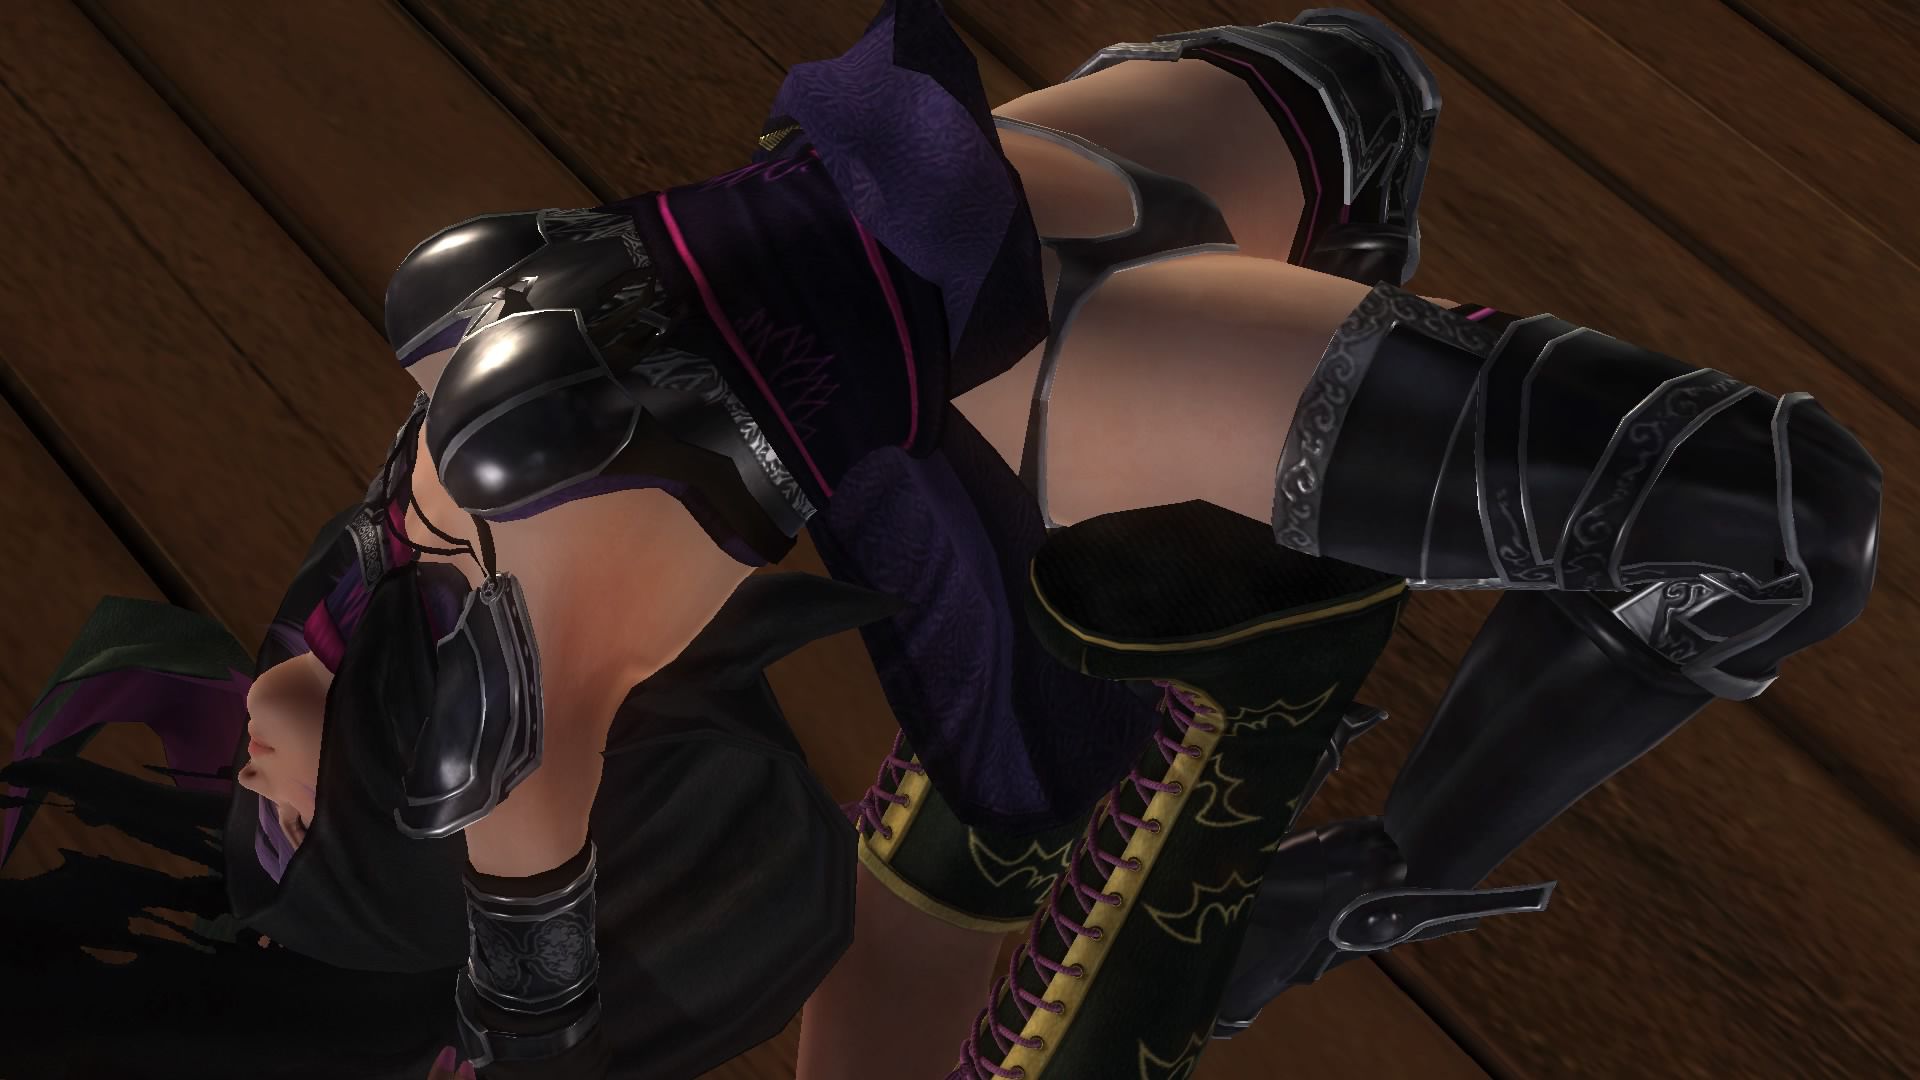 DOA5LR ayane (everyone's Halloween by 2015) to Hitomi and Lisa Tagme throwing at ryona 11